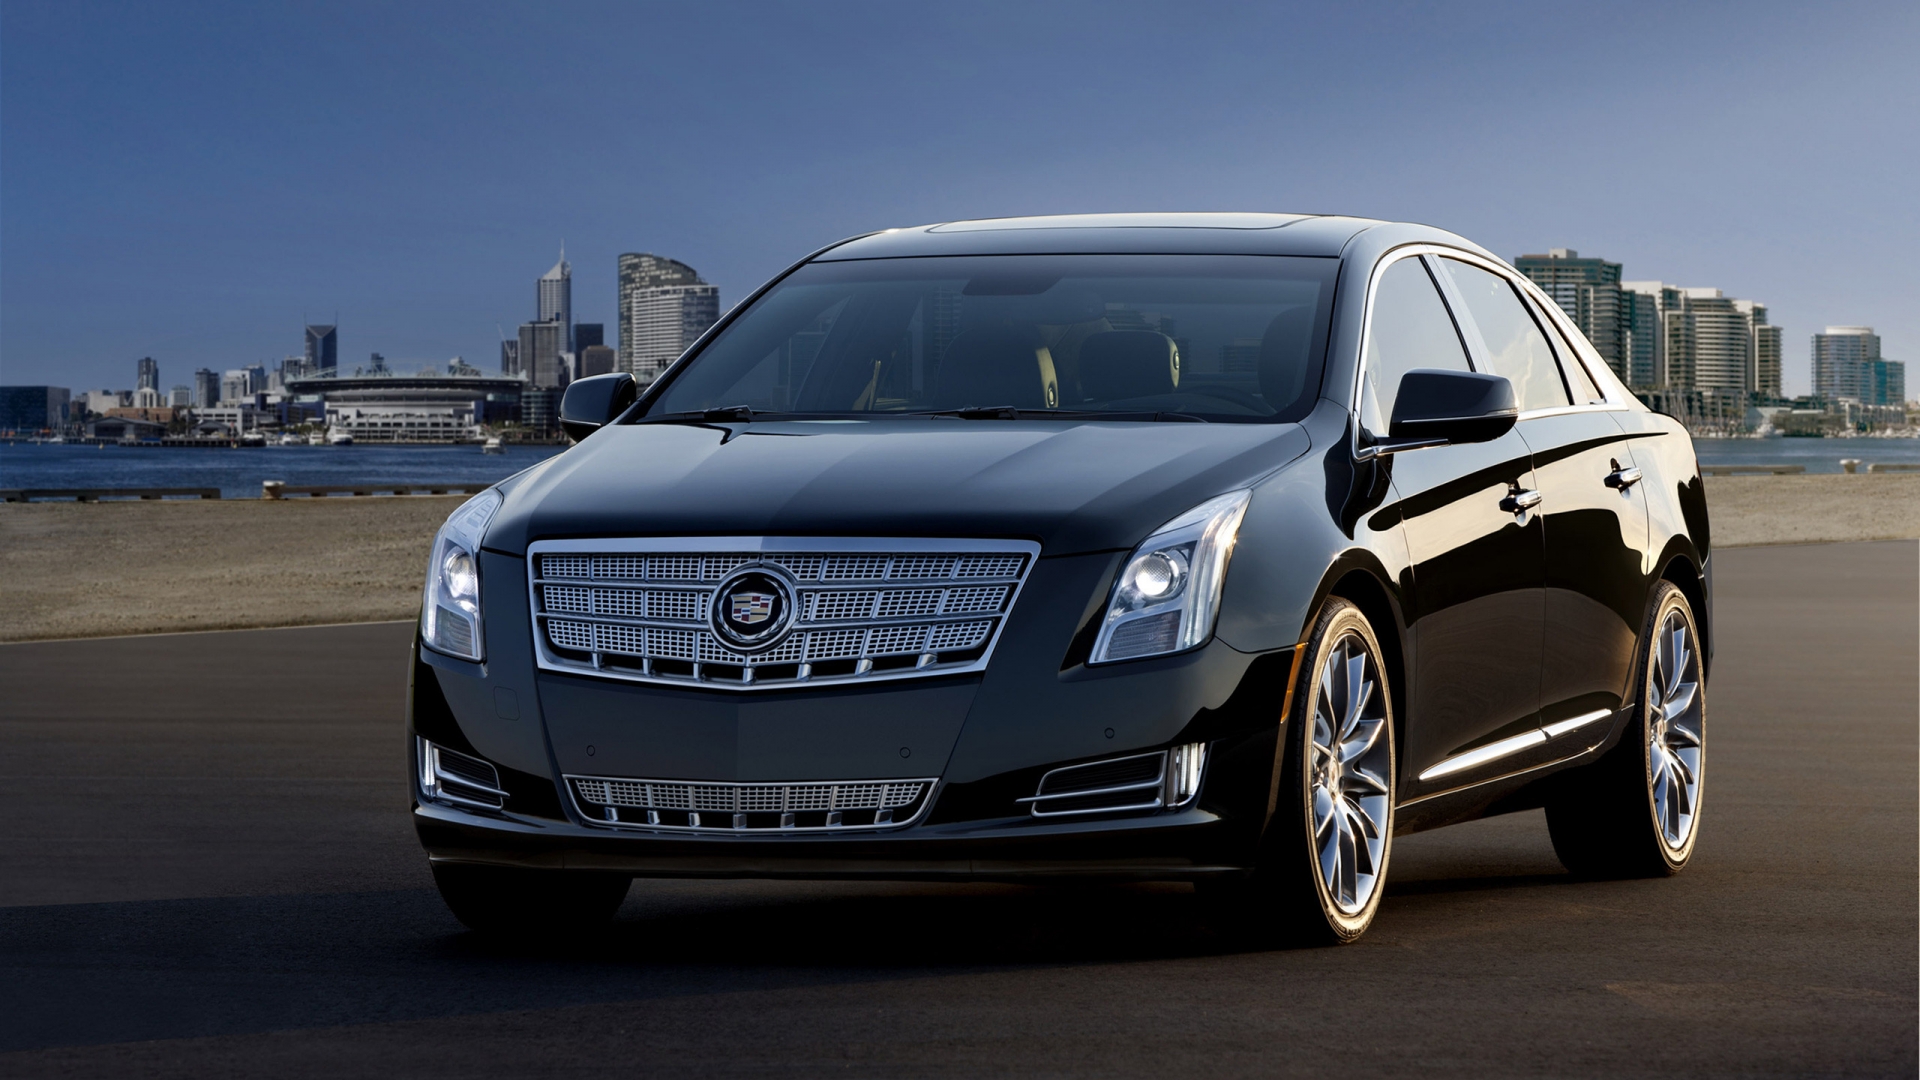 Cadillac XTS 2013 Edition for 1920 x 1080 HDTV 1080p resolution